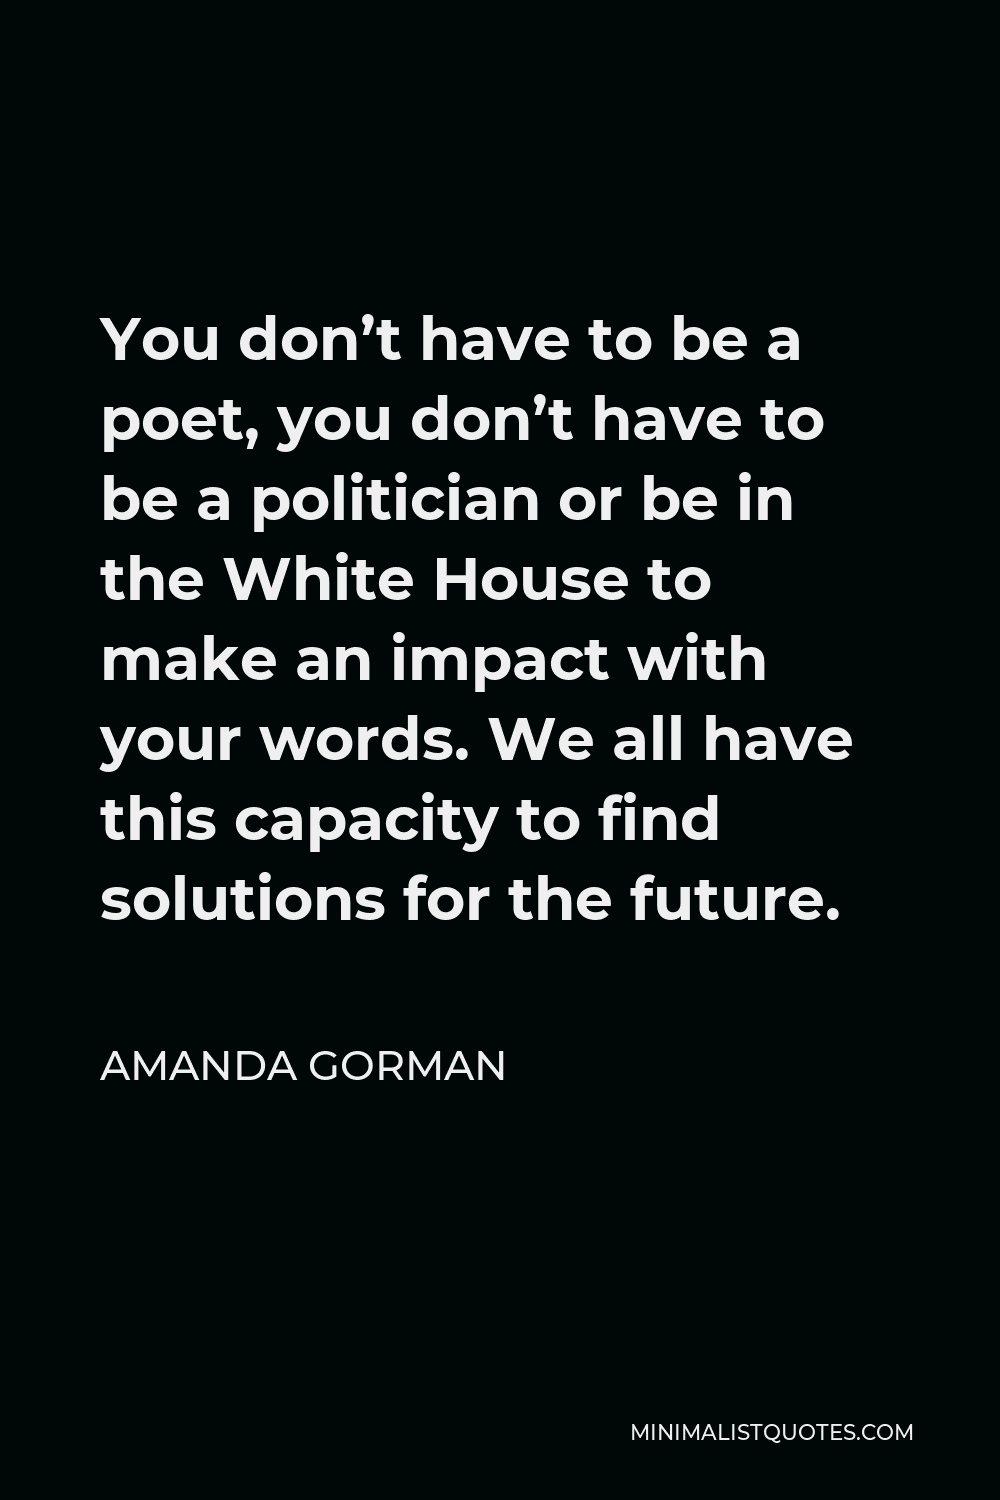 Amanda Gorman Quote - You don’t have to be a poet, you don’t have to be a politician or be in the White House to make an impact with your words. We all have this capacity to find solutions for the future.